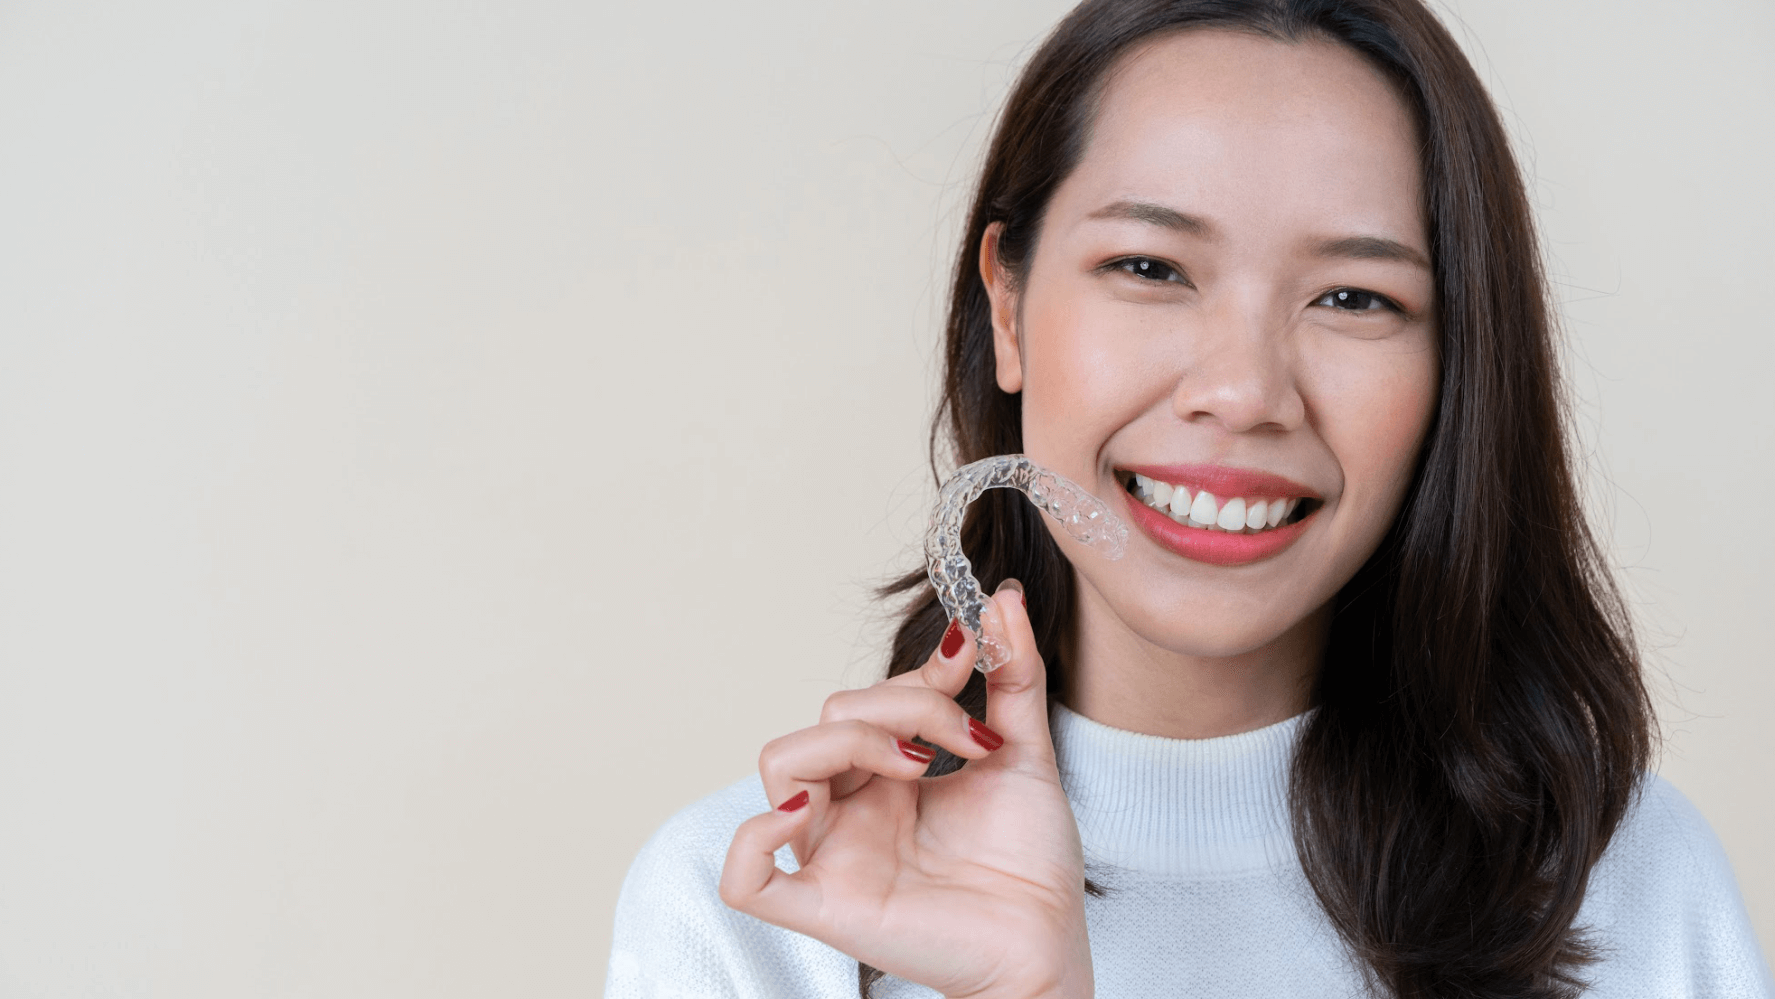 How Often Should You Change Invisalign® Aligners?